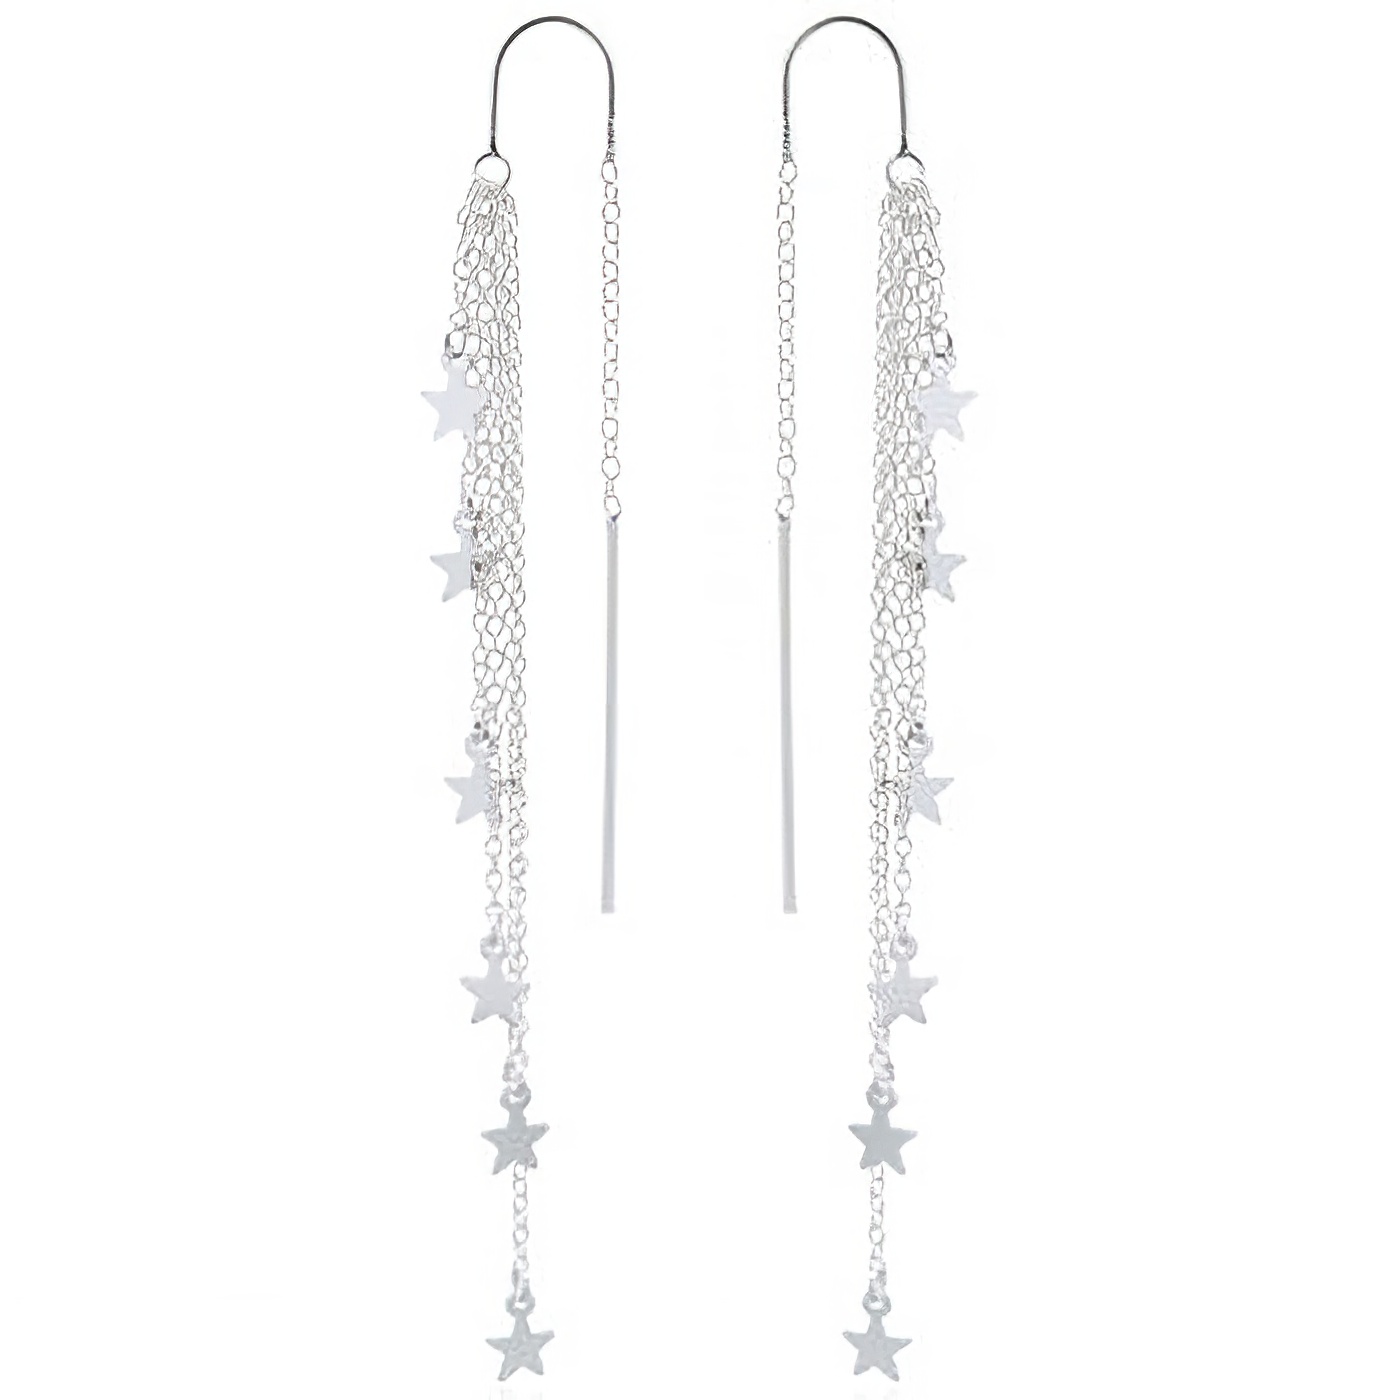 Twinkle Stars On Layered Chains Silver Threader Earrings by BeYindi 